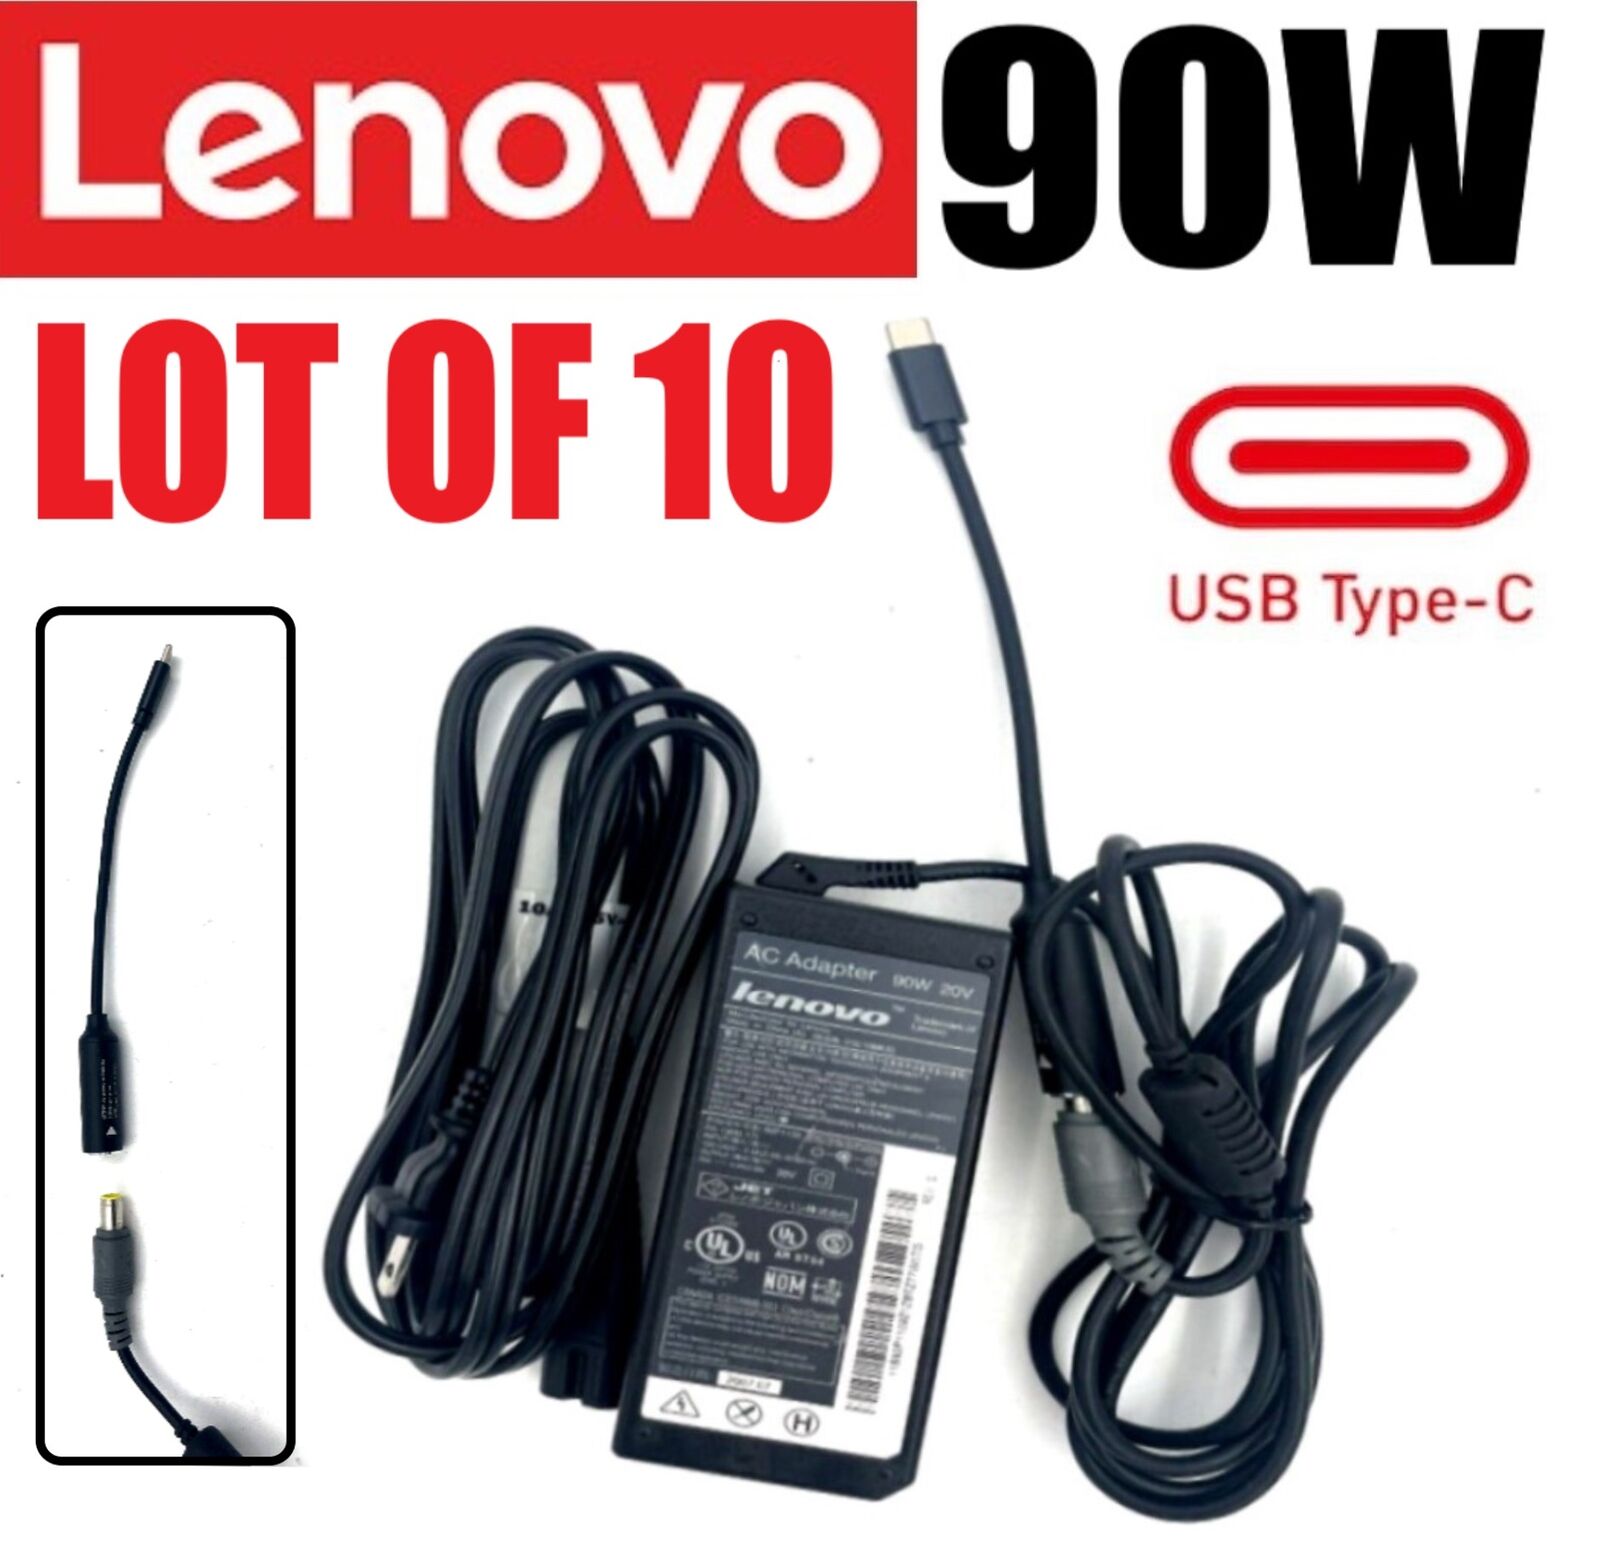 LOT OF 10 90W AC Adapter USB-C Type-C Power Charger  For Lenovo ThinkPad Laptop